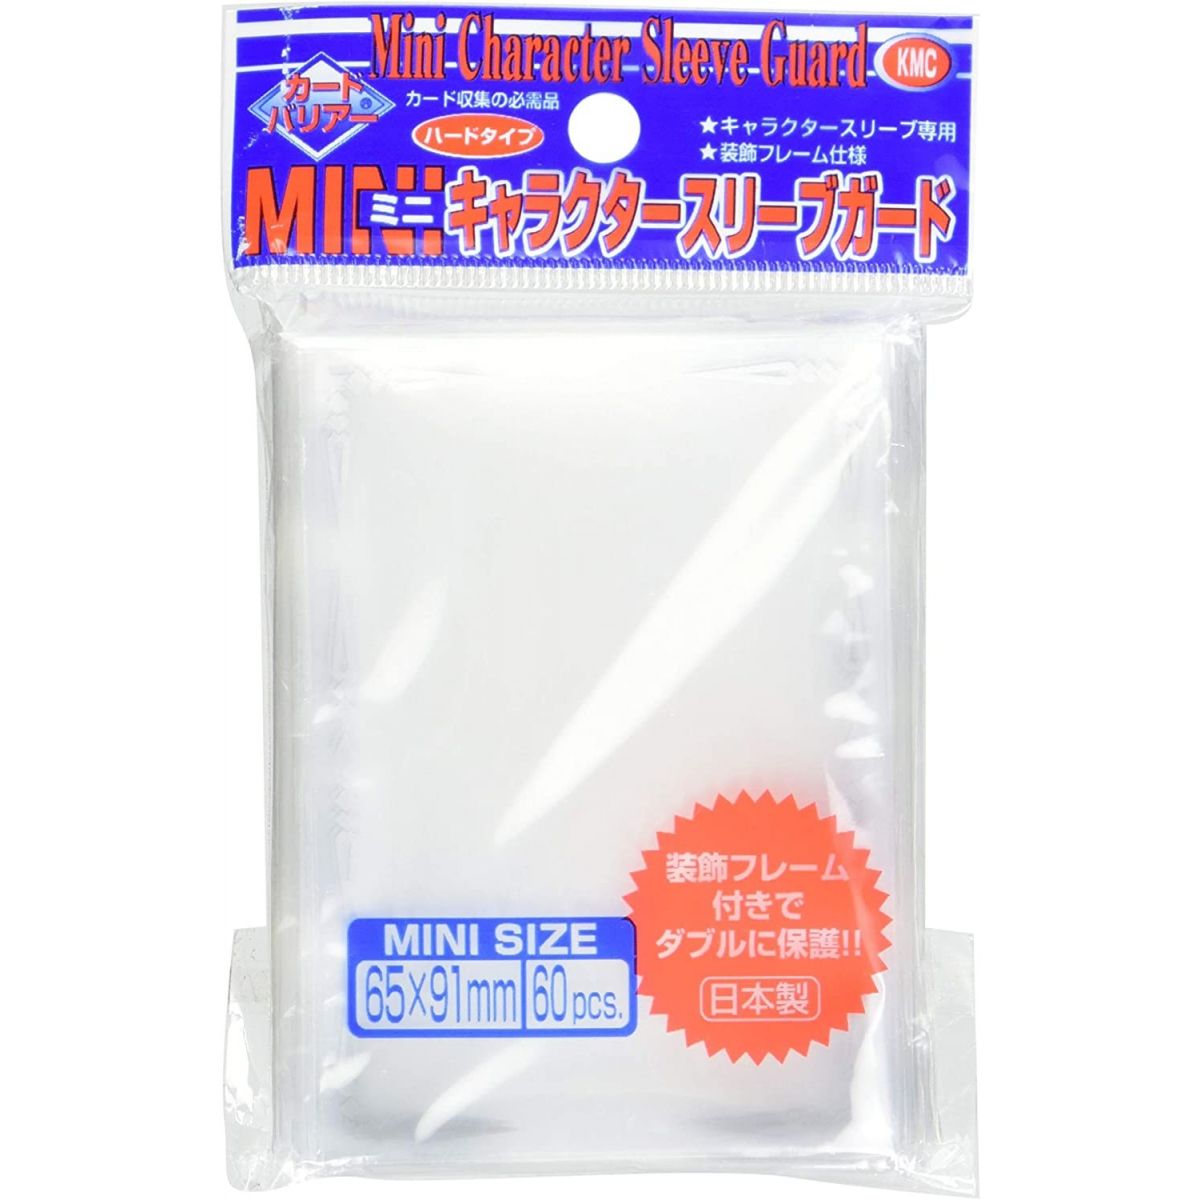 Item KMC - Sur-Sleeves Outer - Small - Mini Character Sleeve Guard